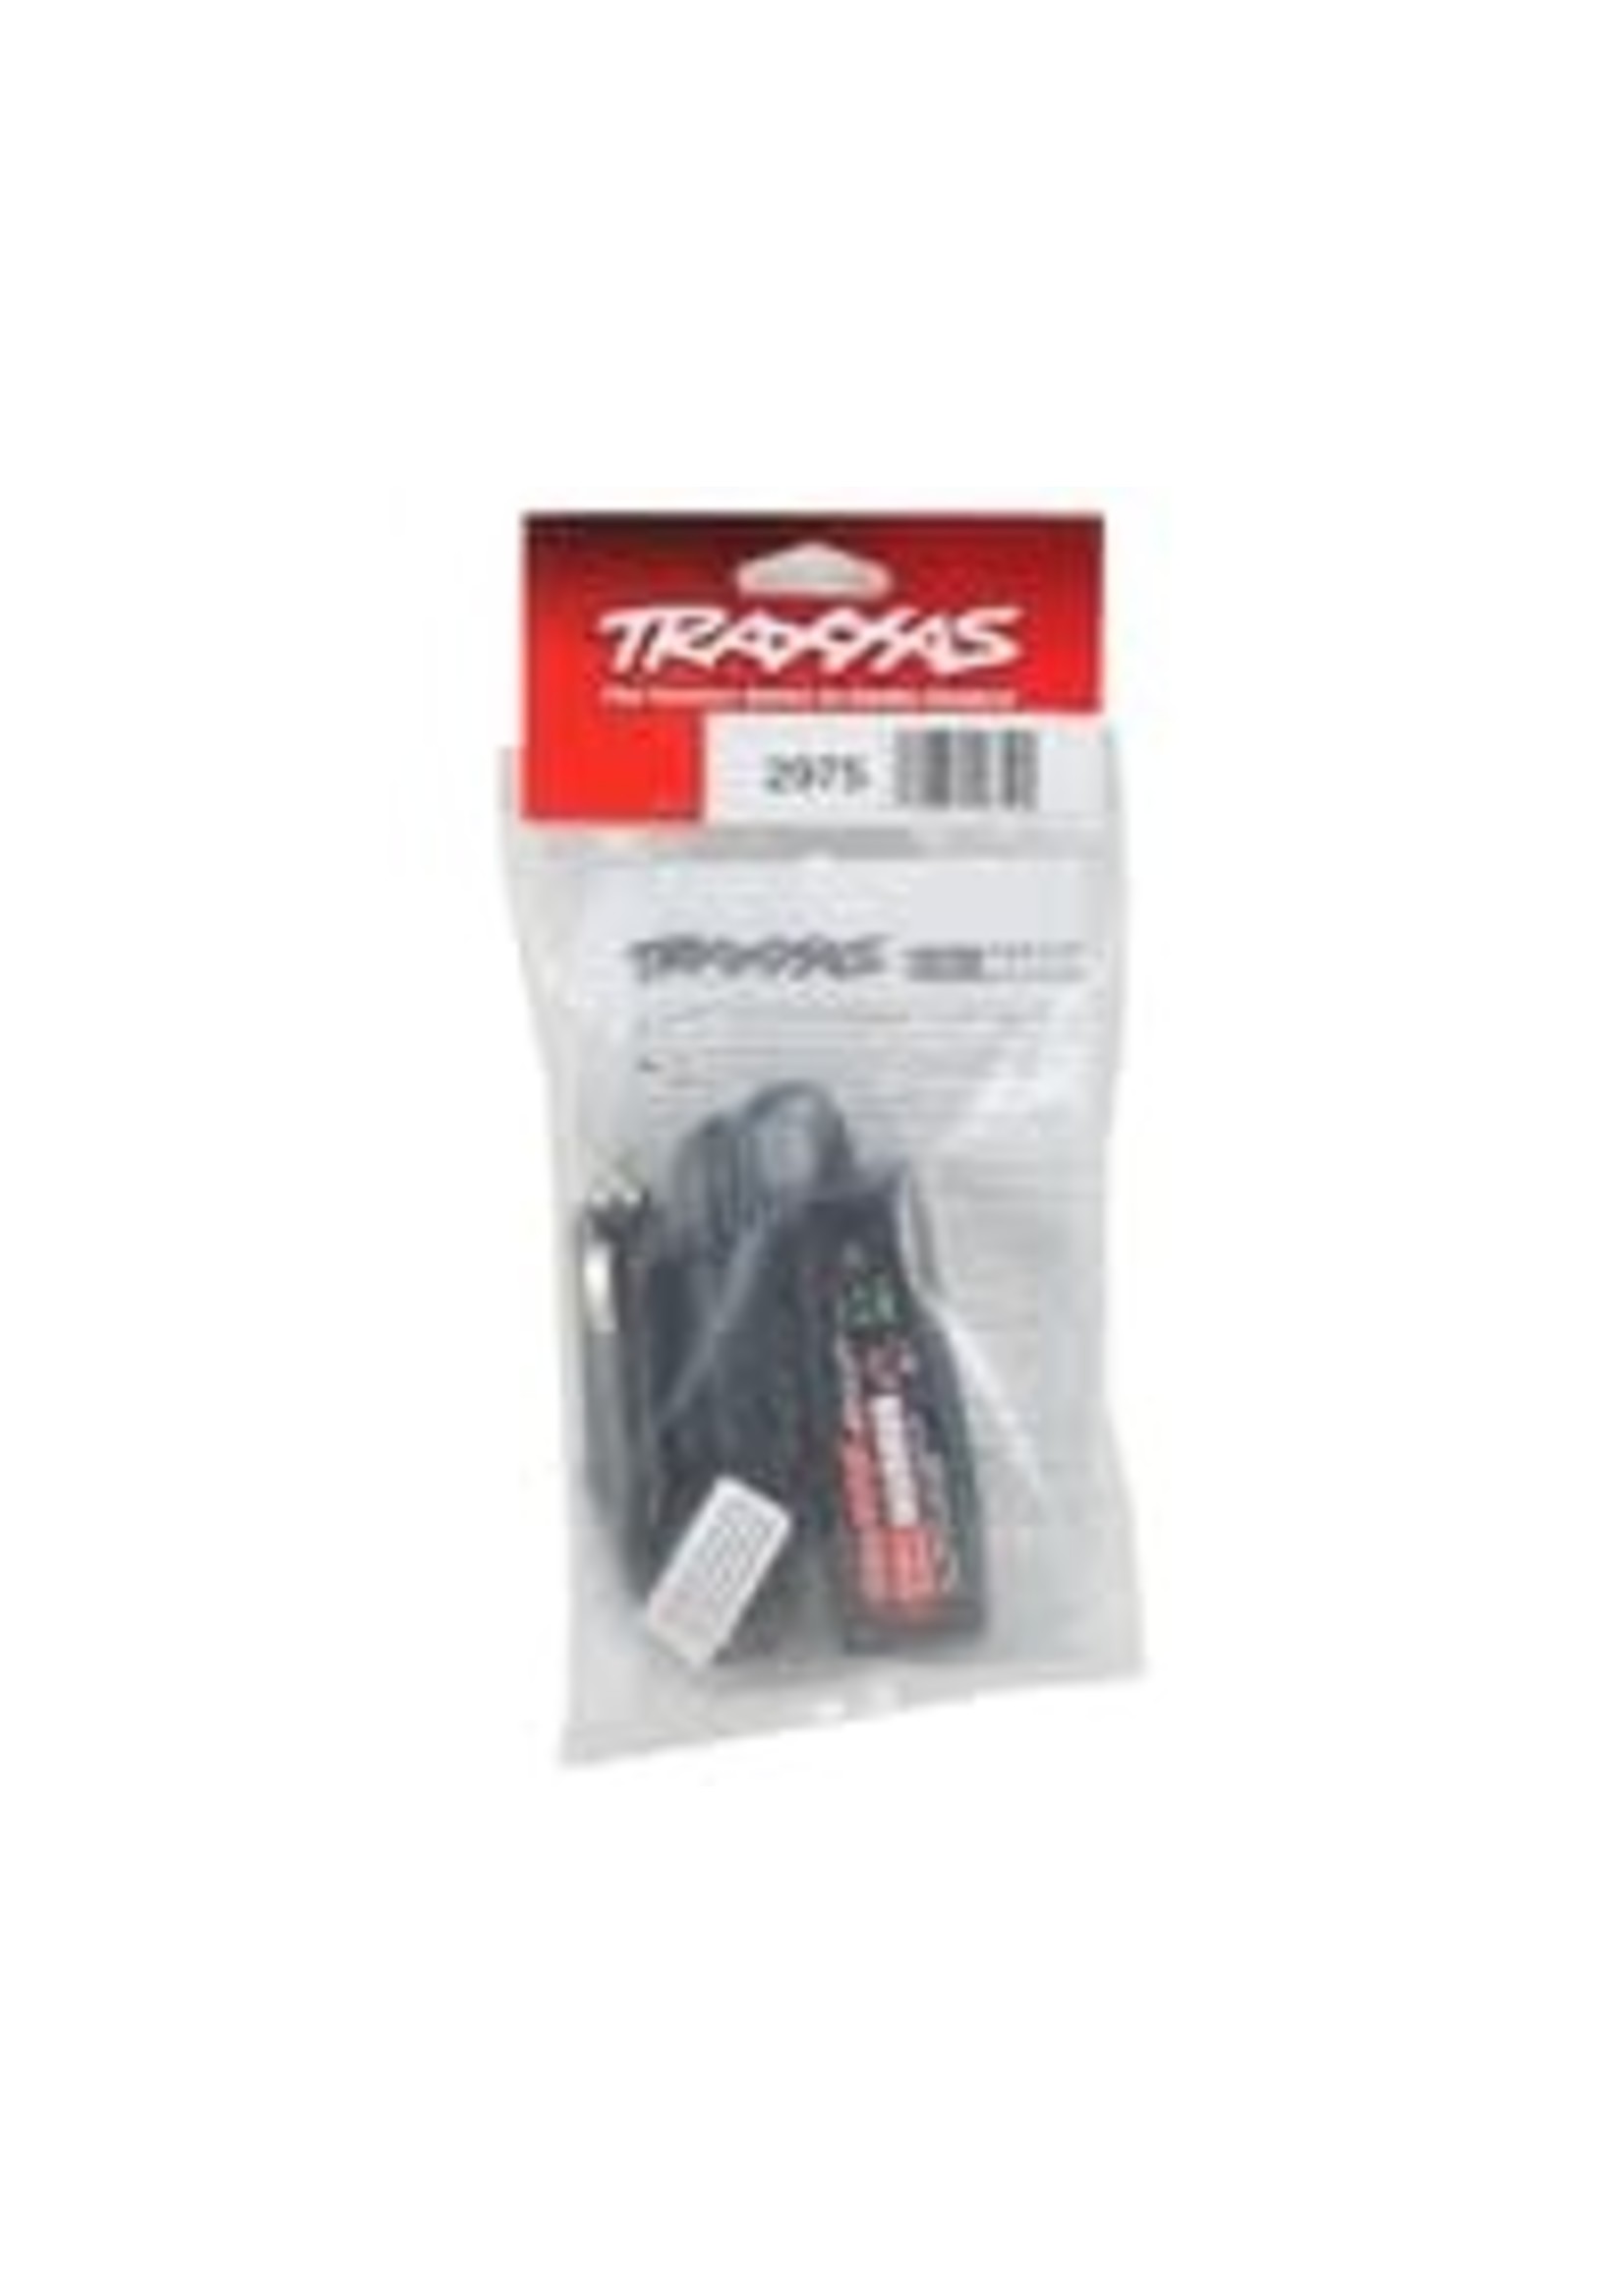 Traxxas 2975 Charger, DC, 4 amp (6 - 7 cell, 7.2 - 8.4 volt, NiMH)